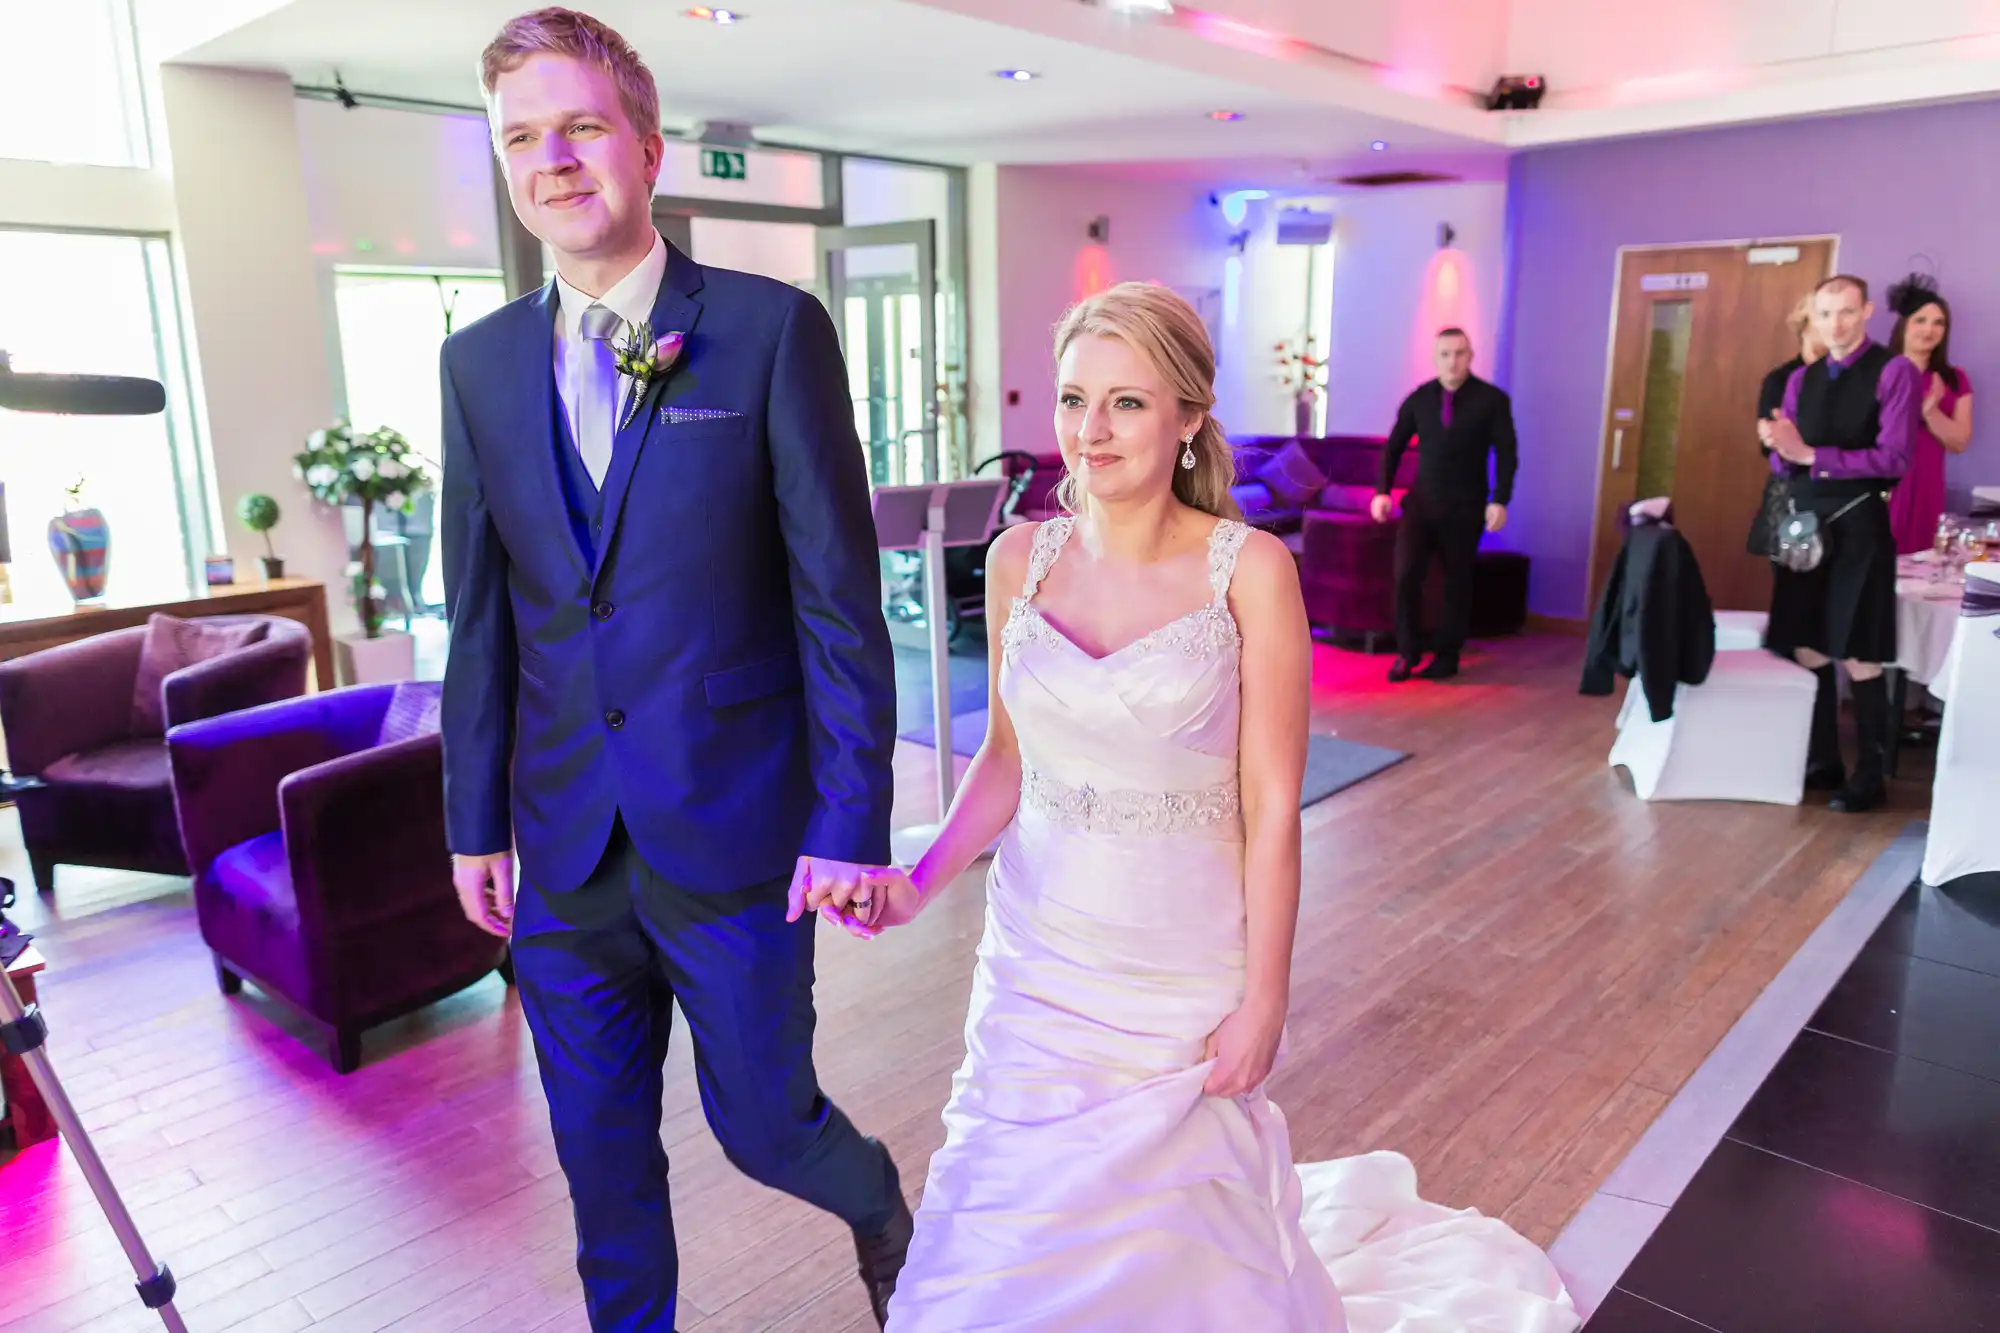 A bride and groom holding hands and walking through a modern venue, with guests in the background.